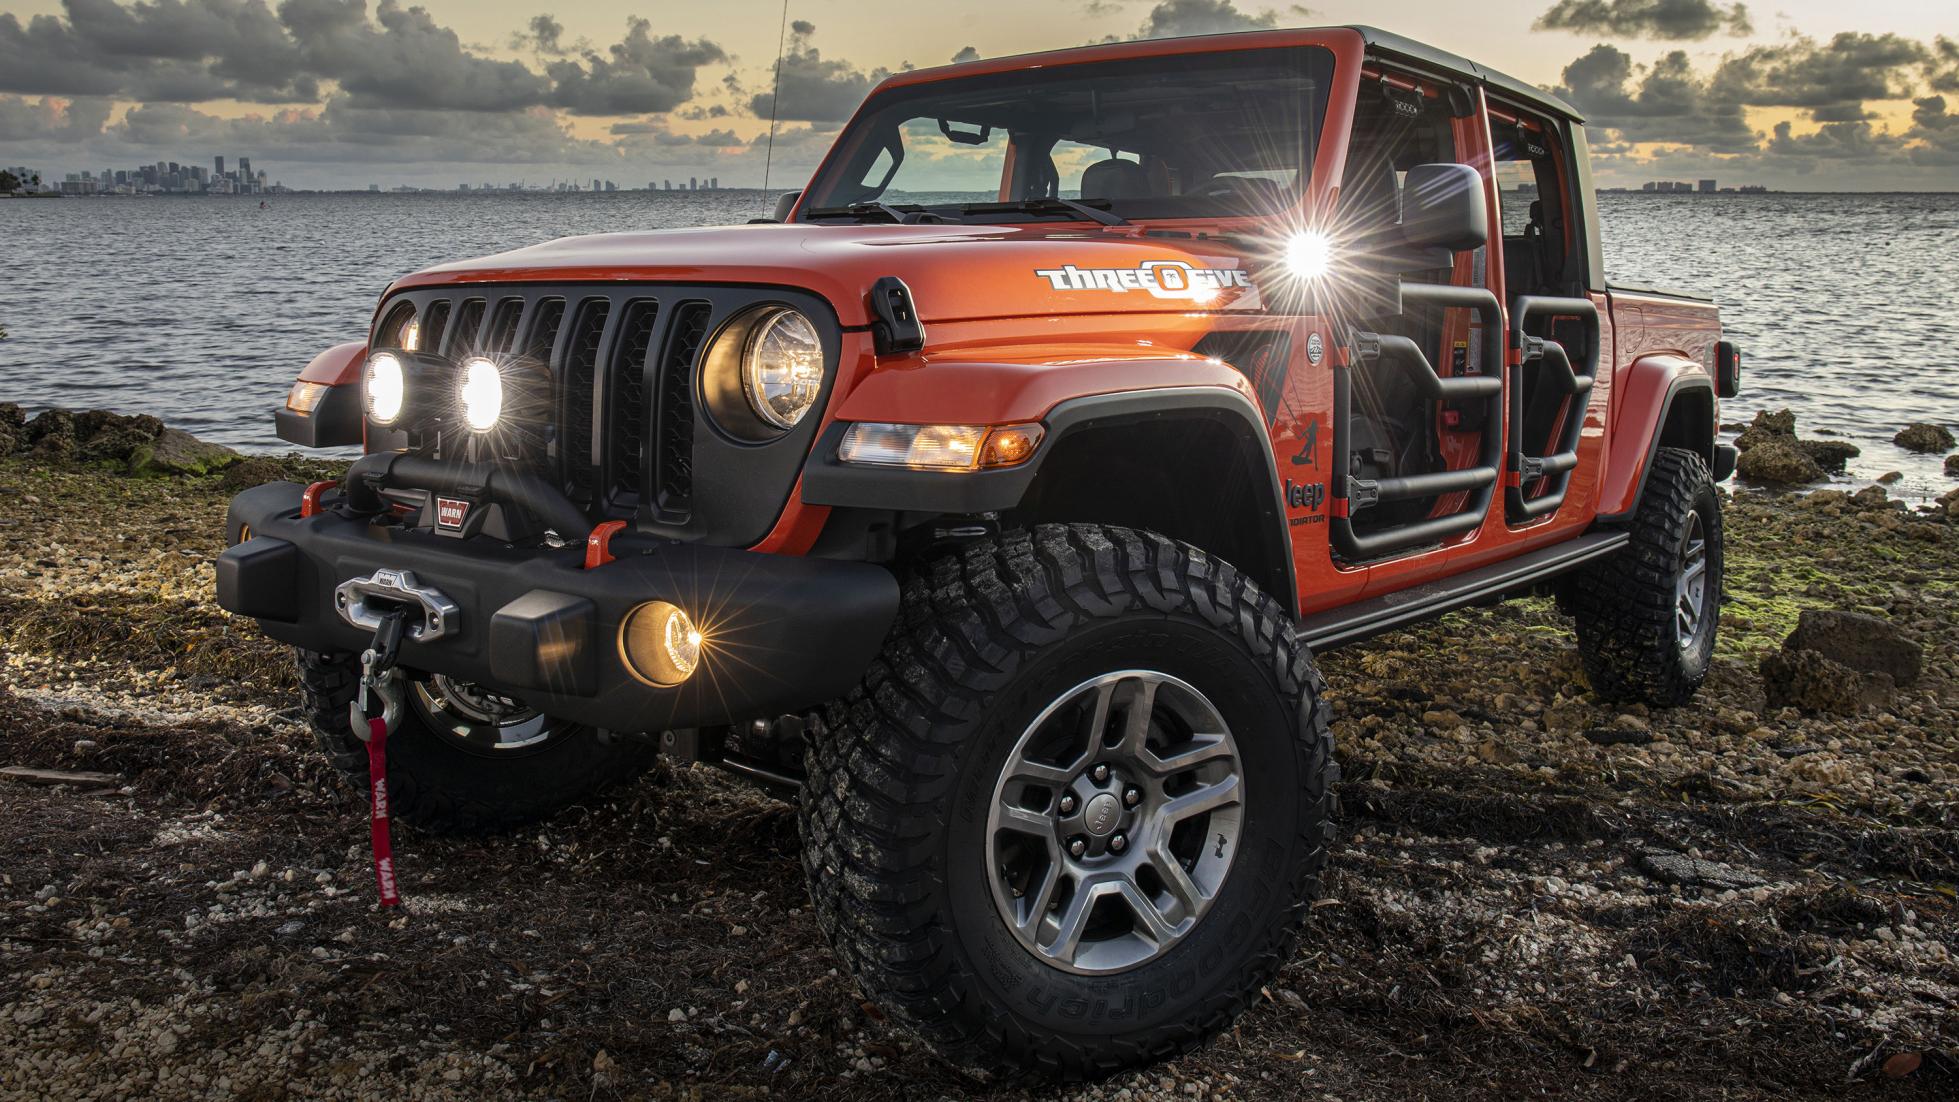 These special edition Jeeps celebrate the city of Miami